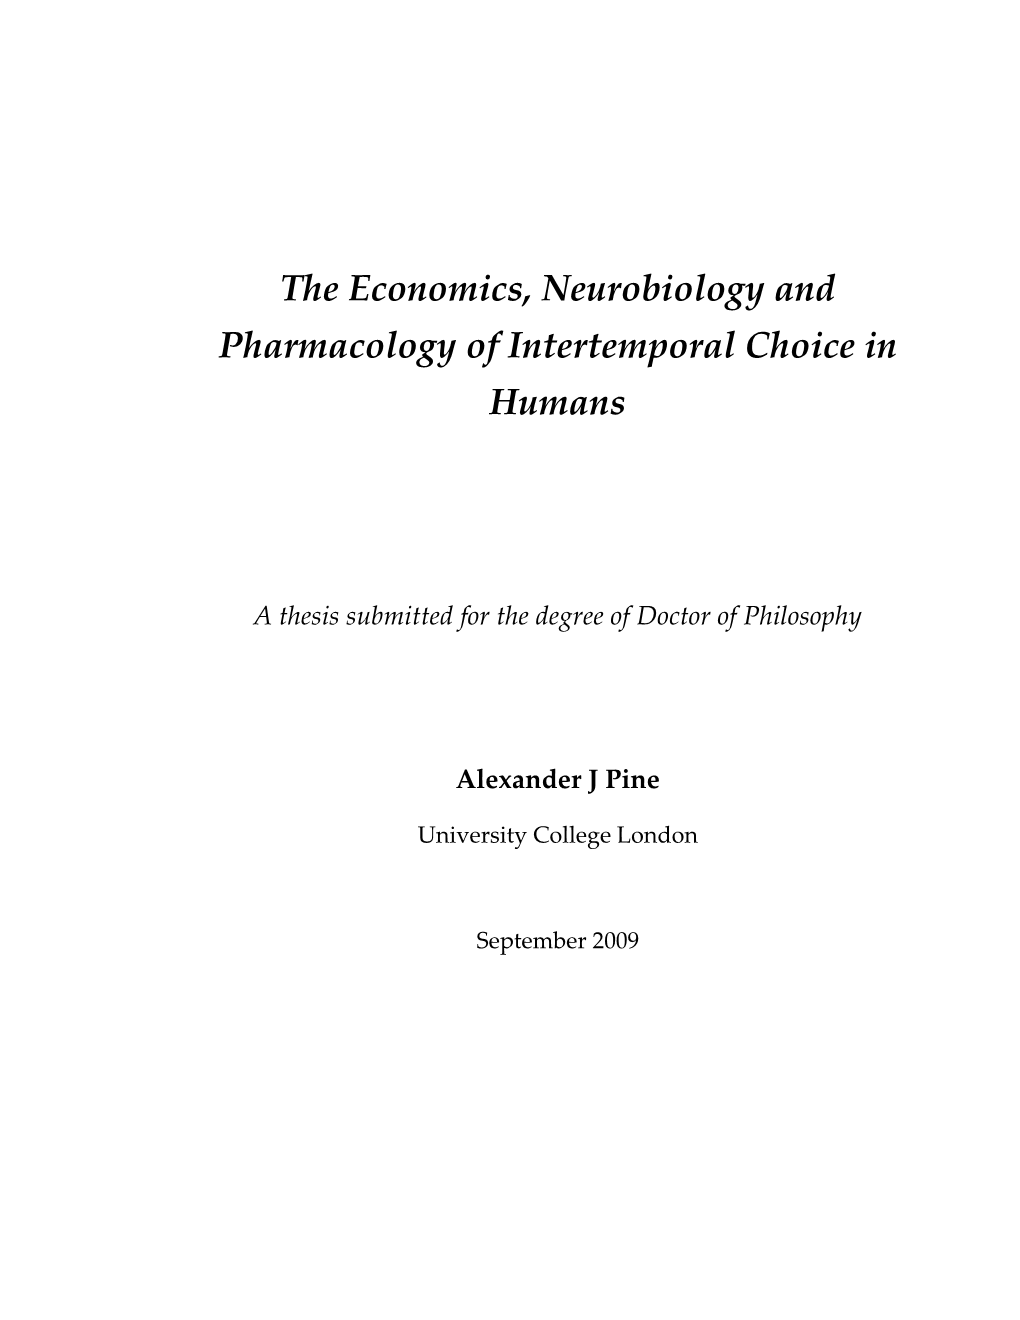 The Economics, Neurobiology and Pharmacology of Intertemporal Choice in Humans